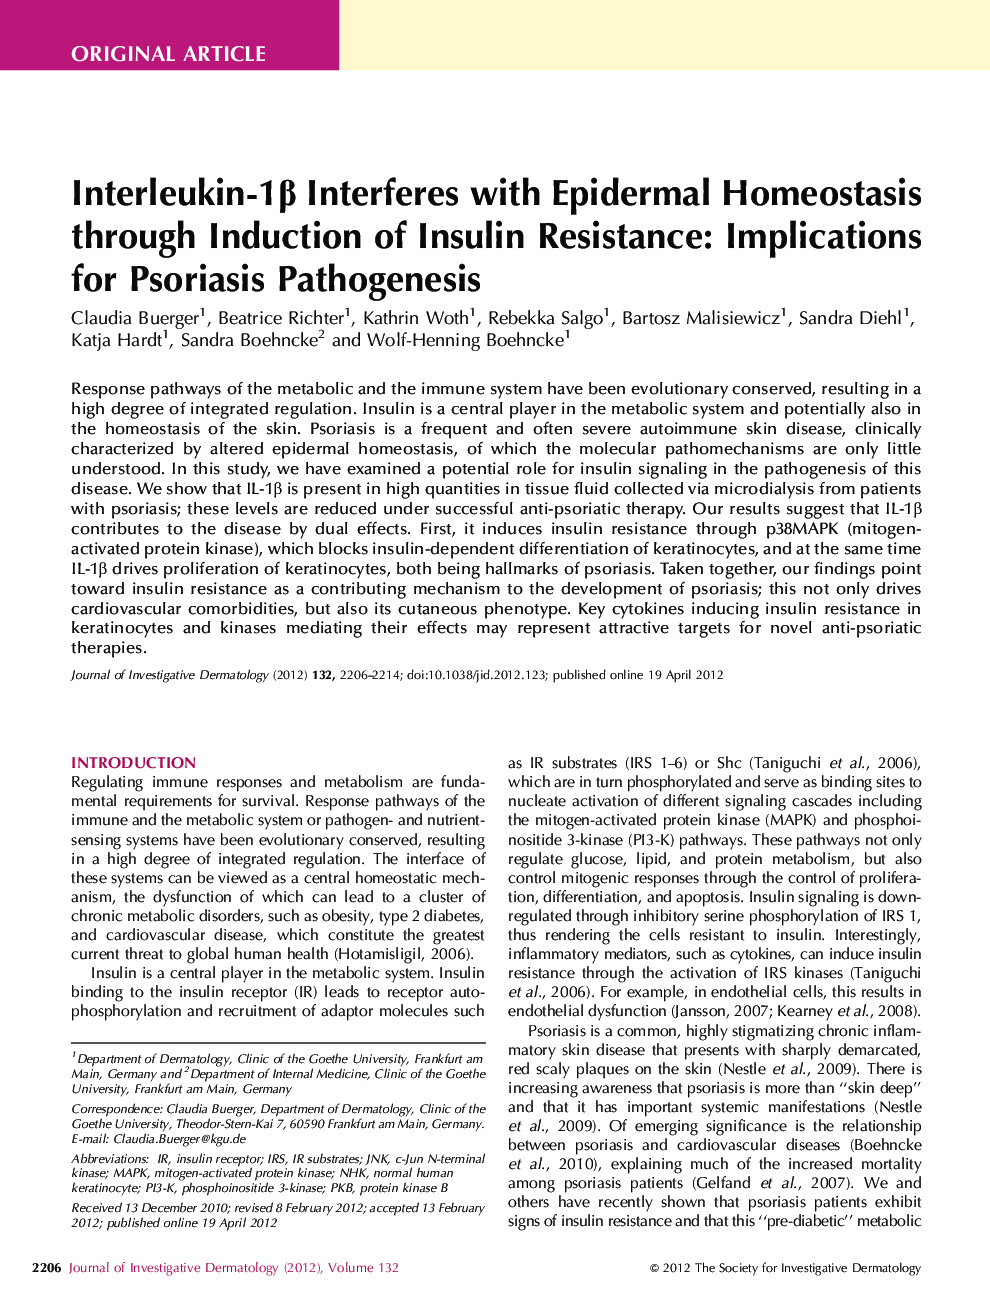 Interleukin-1Î² Interferes with Epidermal Homeostasis through Induction of Insulin Resistance: Implications for Psoriasis Pathogenesis